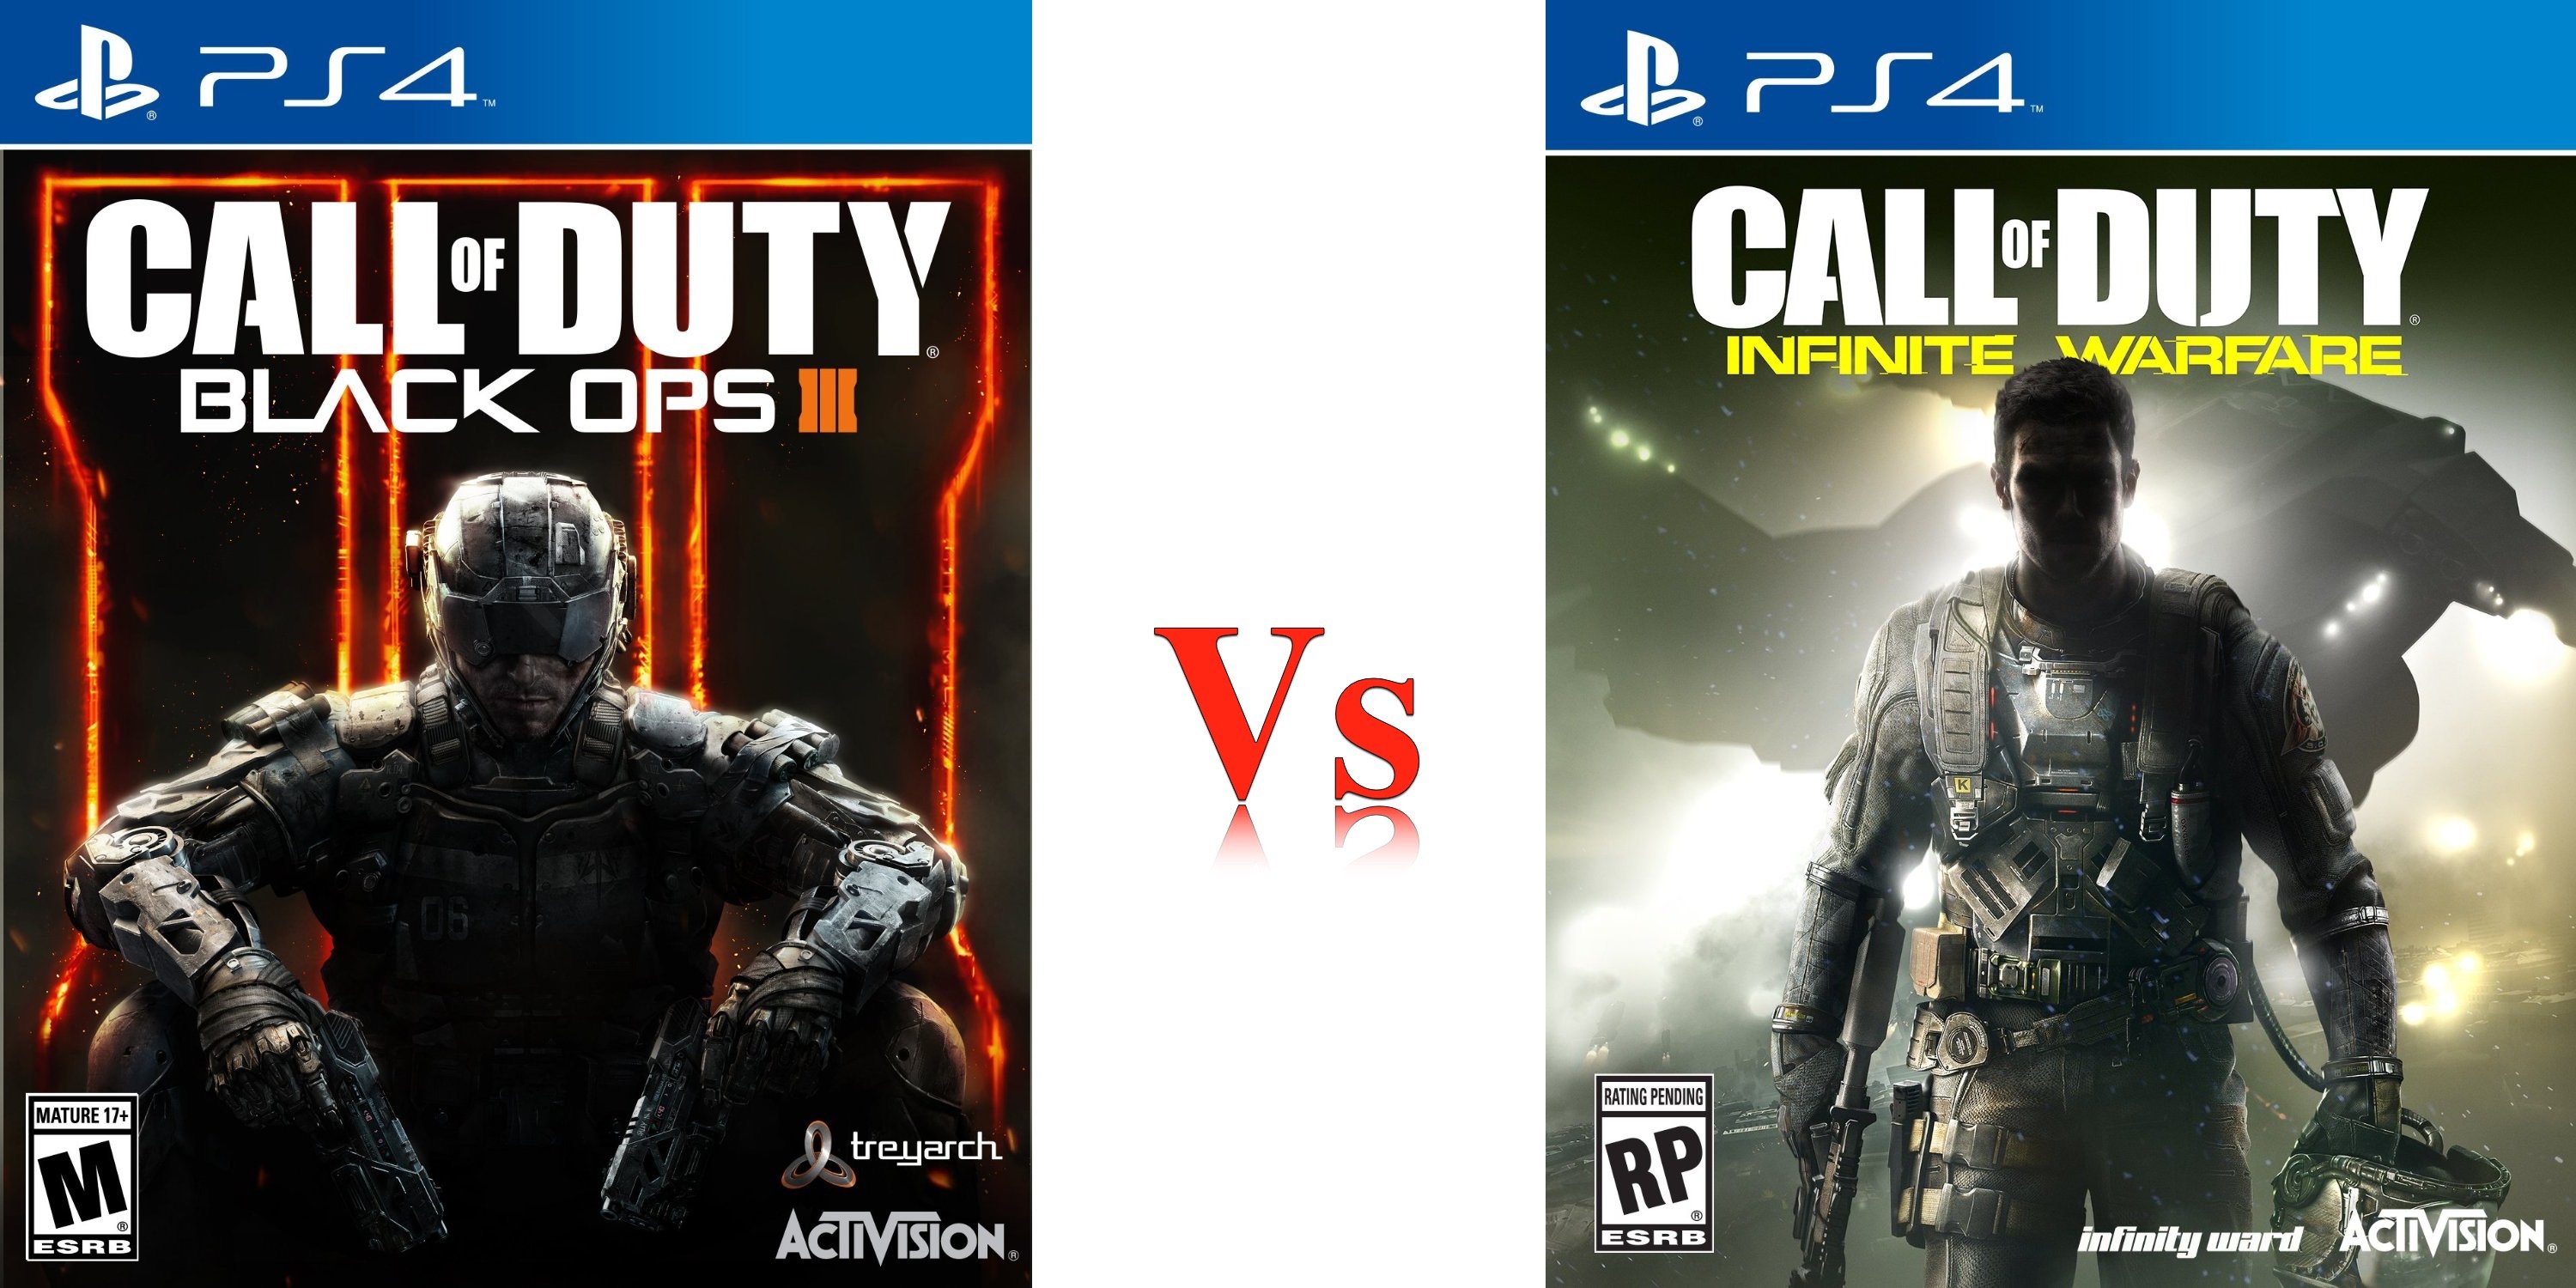 What's new in Call of Duty: Infinite Warfare vs Black Ops 3.